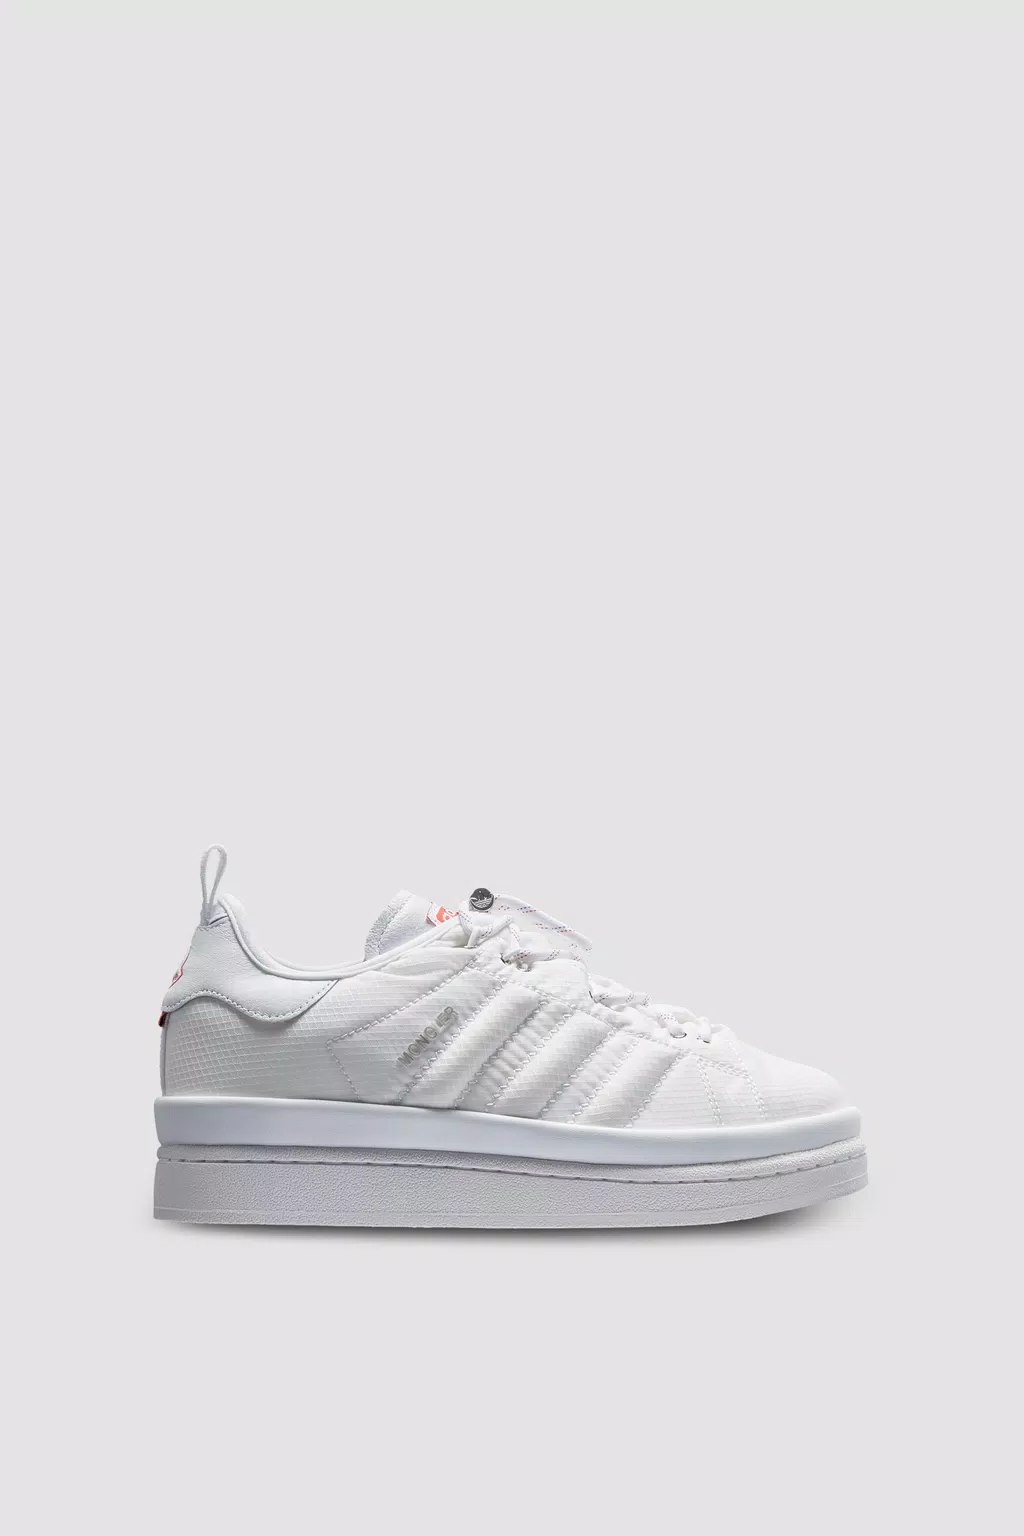 Moncler Campus Sneakers Gender Neutral Optical White Moncler 1